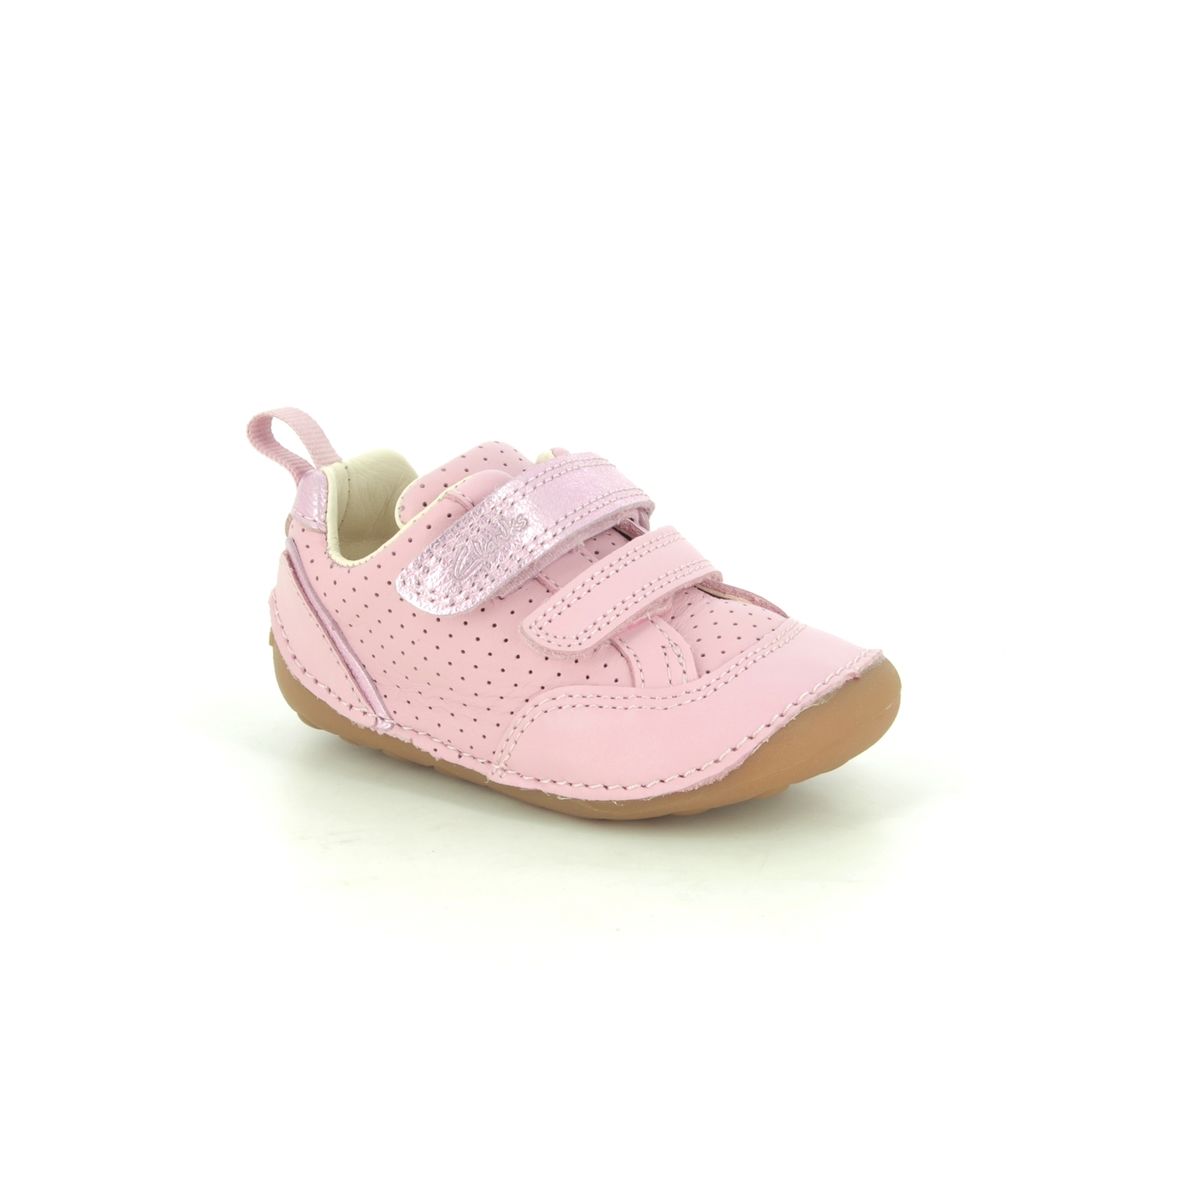 Clarks Tiny Sky T Pink Leather Kids Girls First And Baby Shoes 576286F In Size 3.5 In Plain Pink Leather F Width Fitting Regular Fit For kids